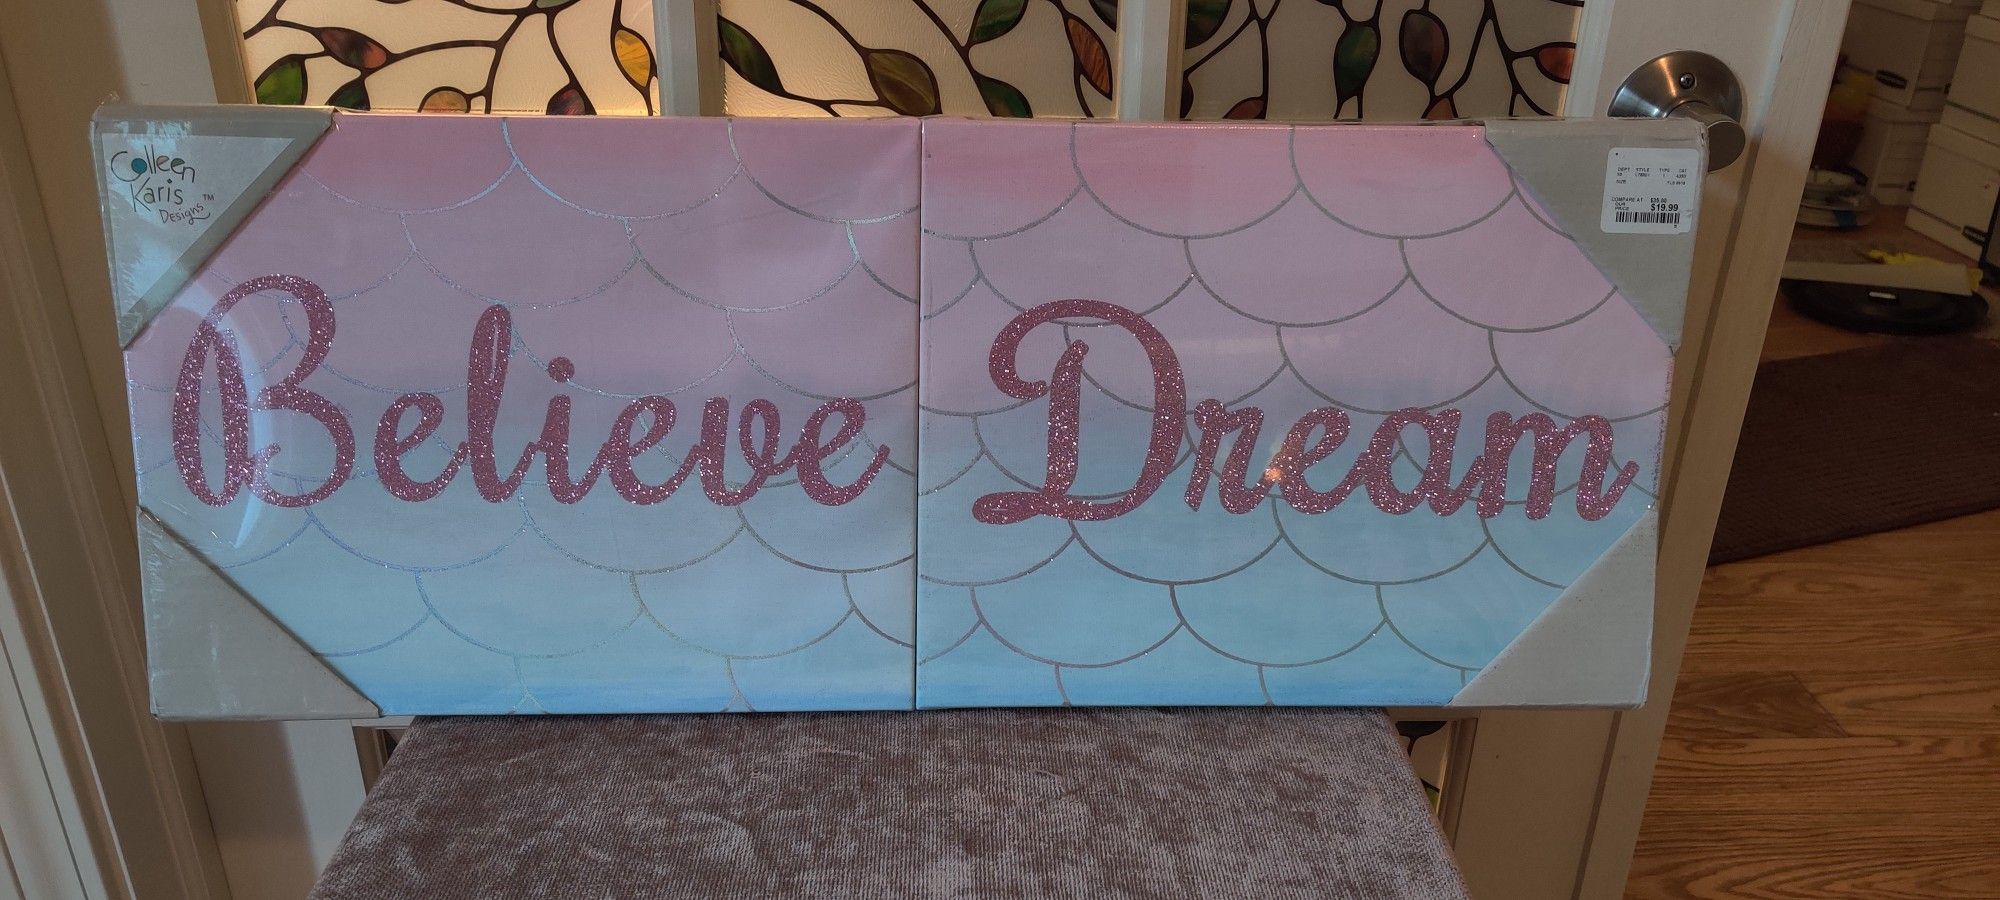 NWT Set of 2 Canvases for little girl's room. Believe. Dream.